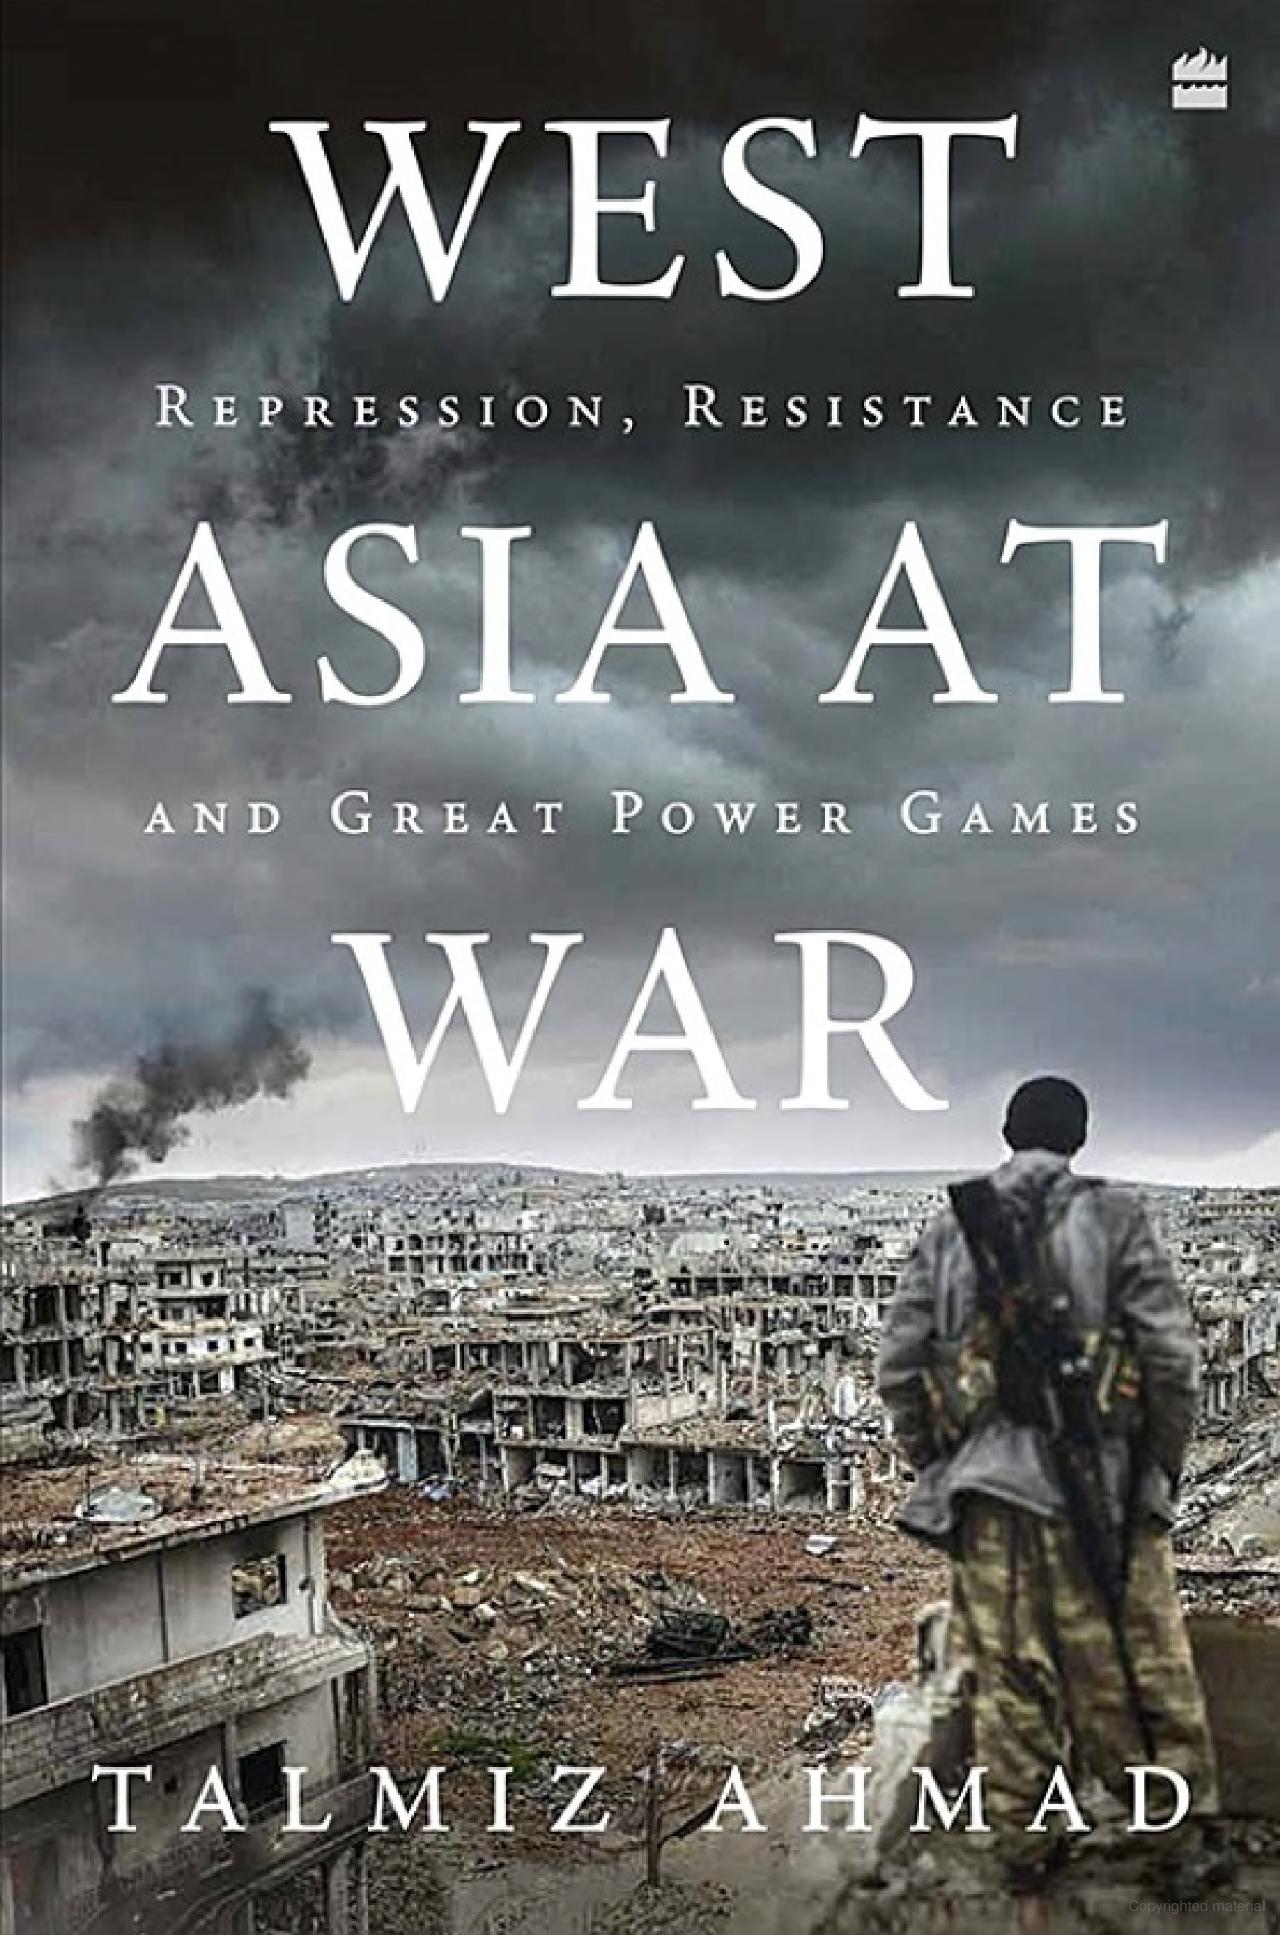 www.sundayguardianlive.com: West Asia at War is a monumental work of rare scholarship